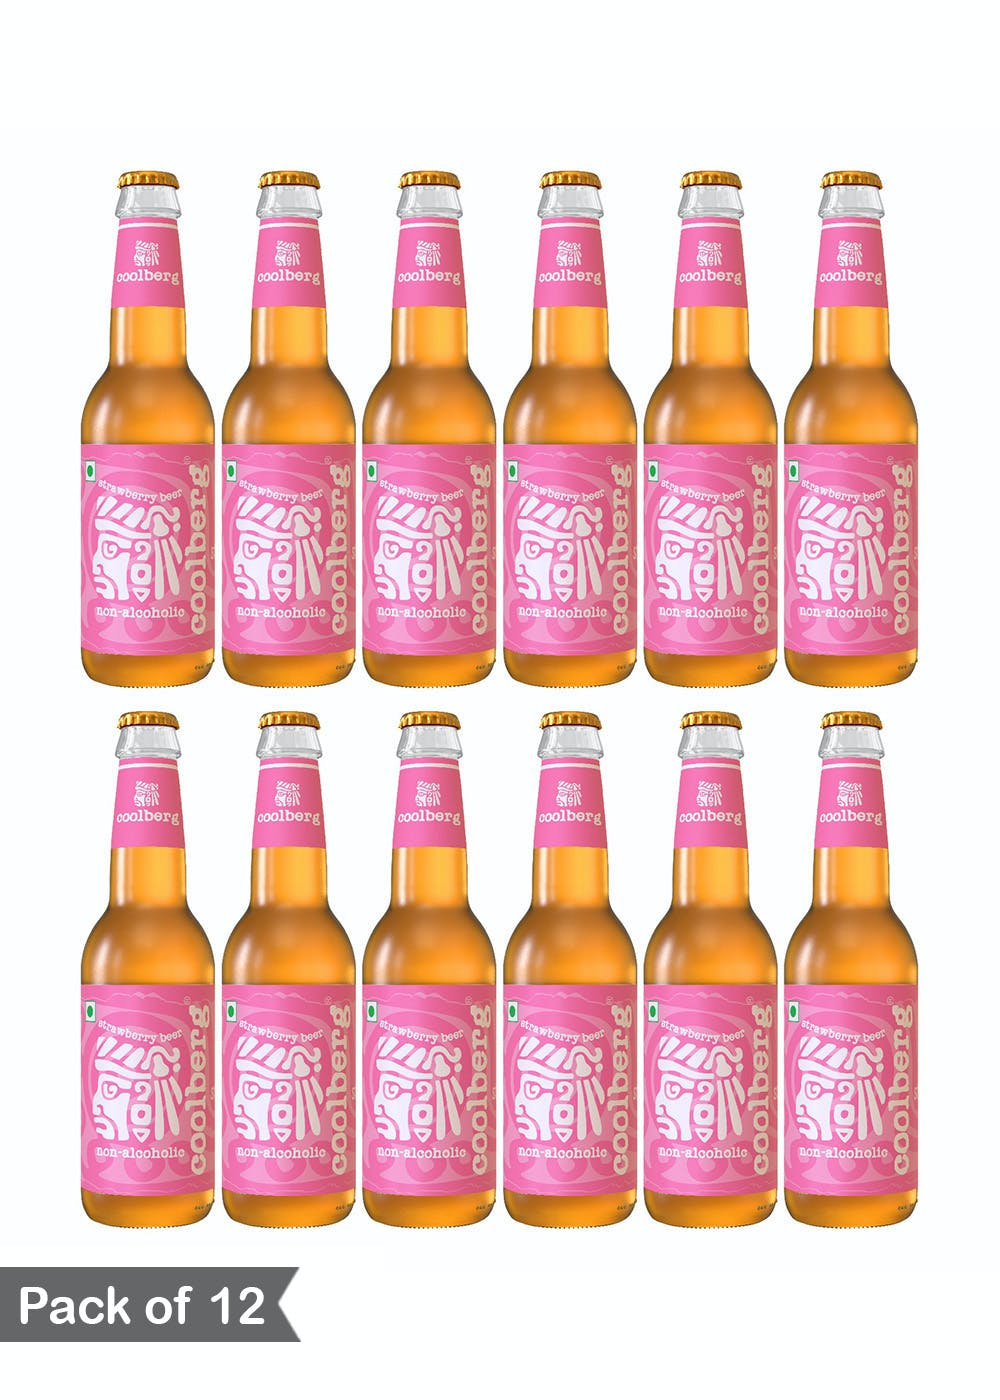  Strawberry Non-Alcoholic Beer 330ml - Pack of 12